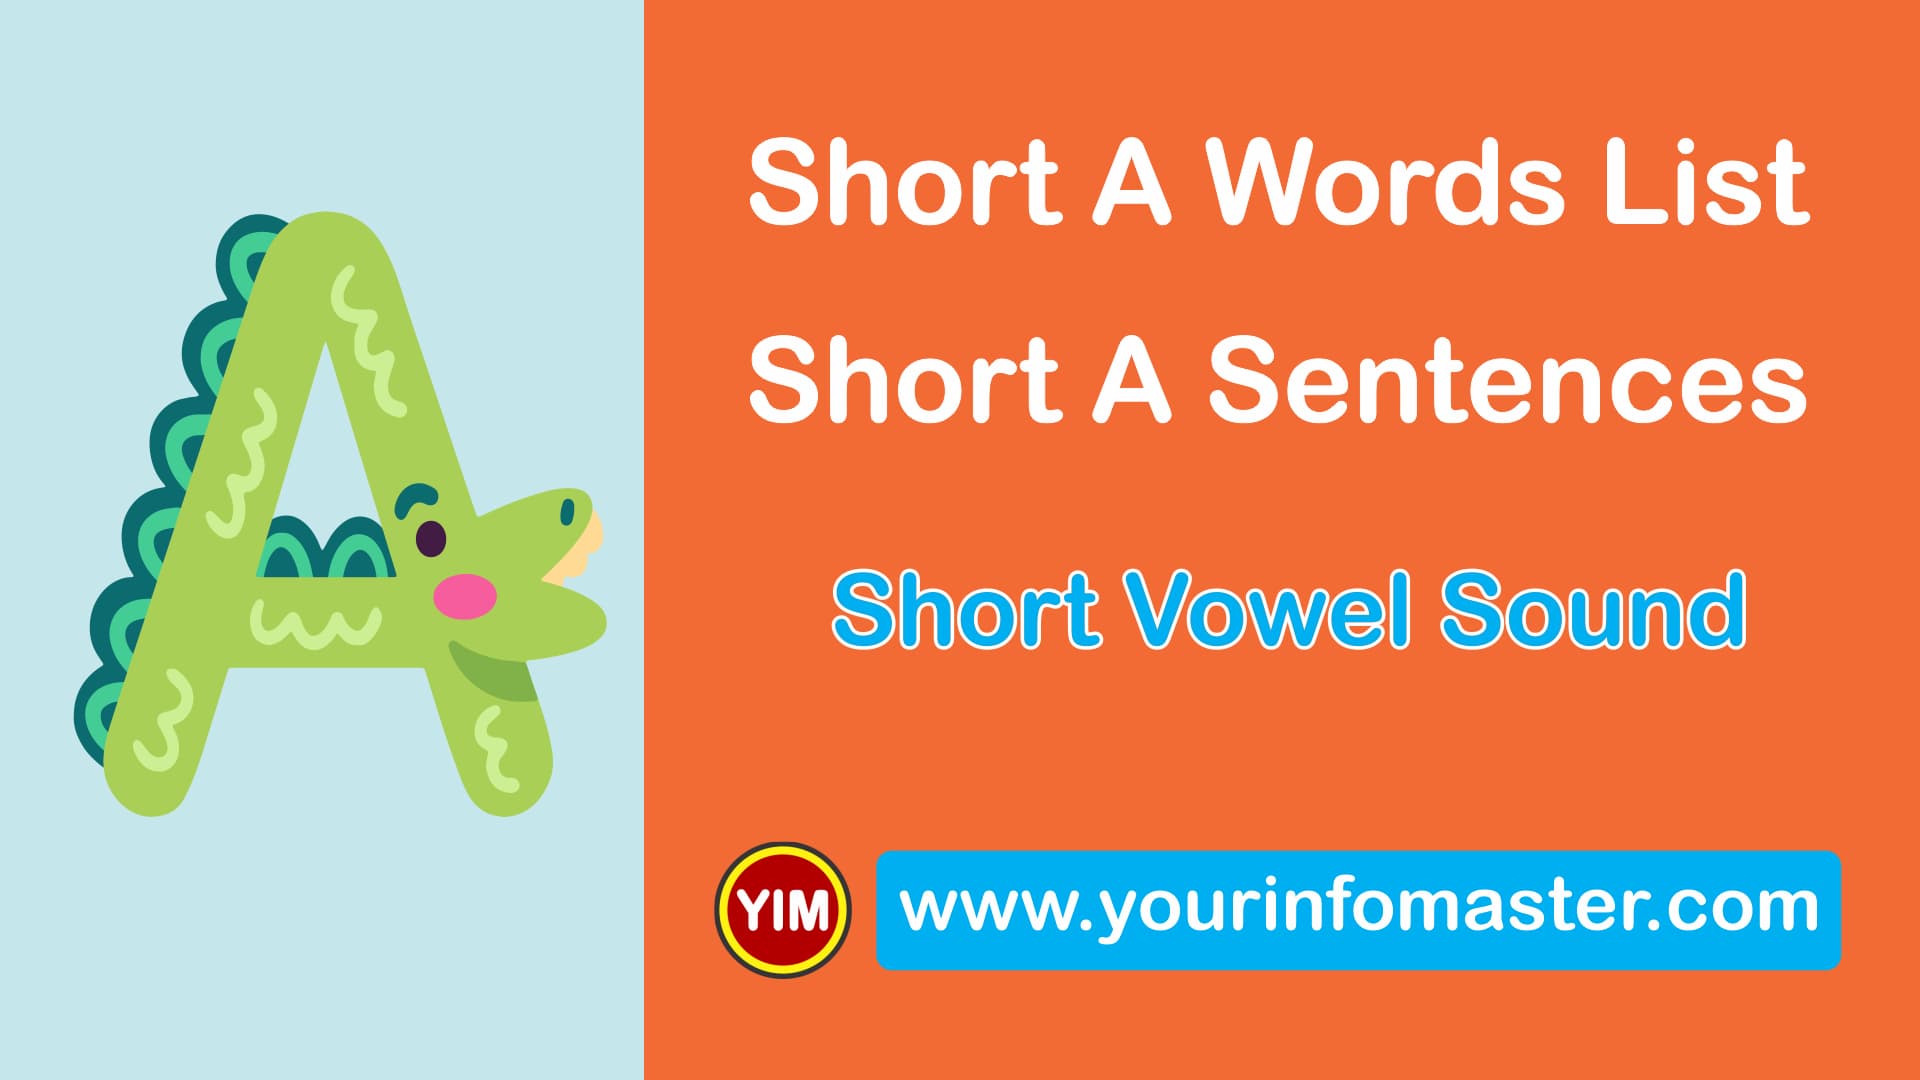 a words, awesome words, cool short words, cool words, Learning Spellings, Long versus Short Vowels, short A sound words, short A words, Short A Words List, Short A Words Worksheets, Short Vowel, Short Vowel Examples, Short Vowel Sound, Short Vowel Sounds Examples, Using Short Vowel Sounds, Vowel A Sound, Vowel Pronunciation, What is a Vowel, word of the day for kids